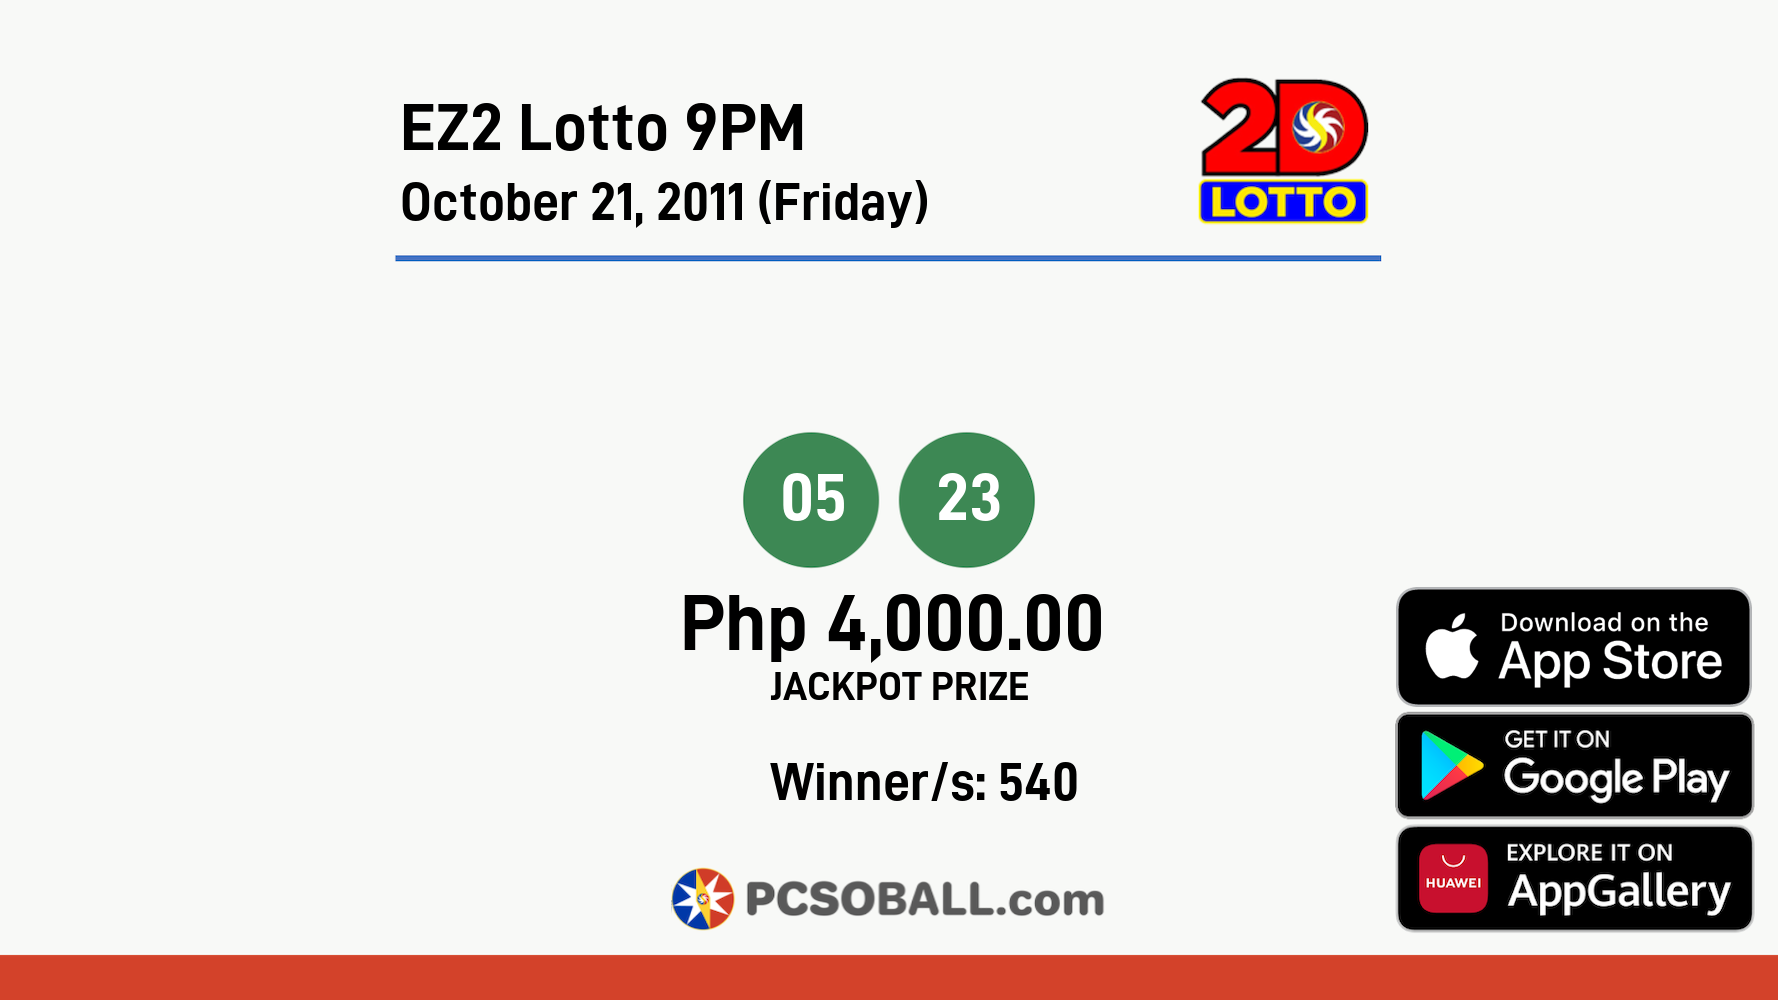 EZ2 Lotto 9PM October 21, 2011 (Friday) Result